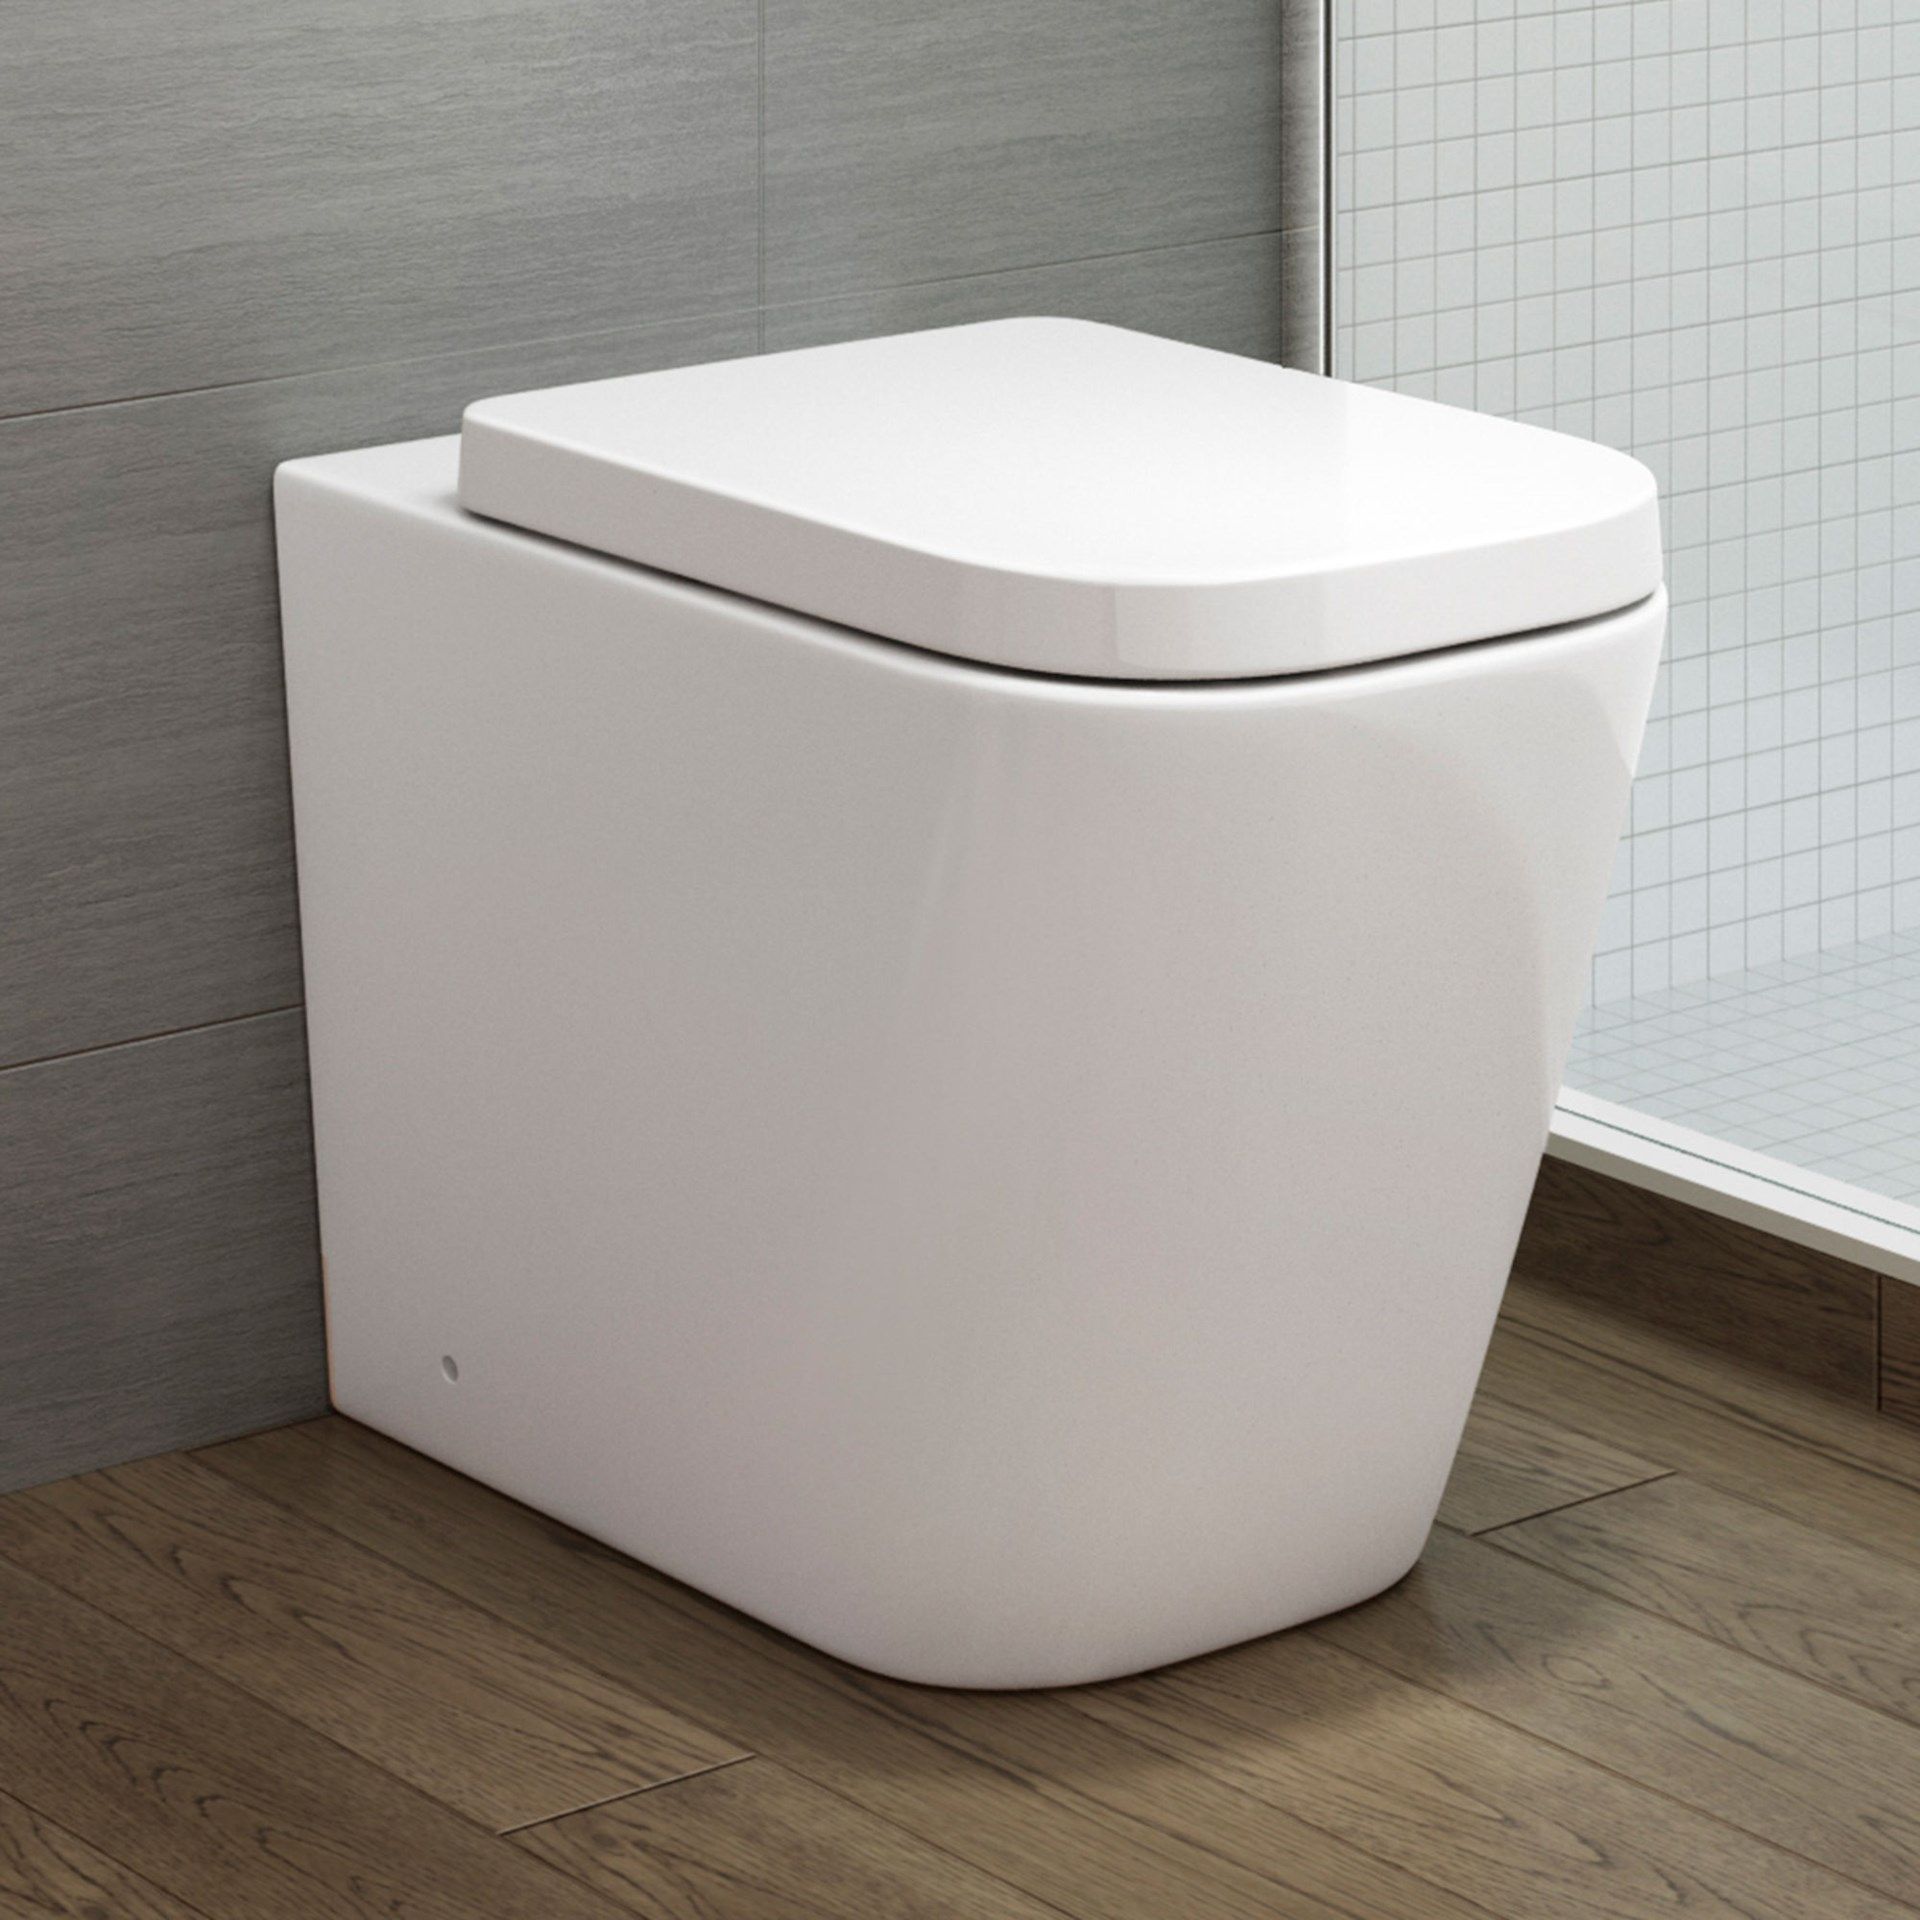 Florence Rimless Back to Wall Toilet inc Luxury Soft Close Seat. RRP £349.99. 640BTW. Riml...